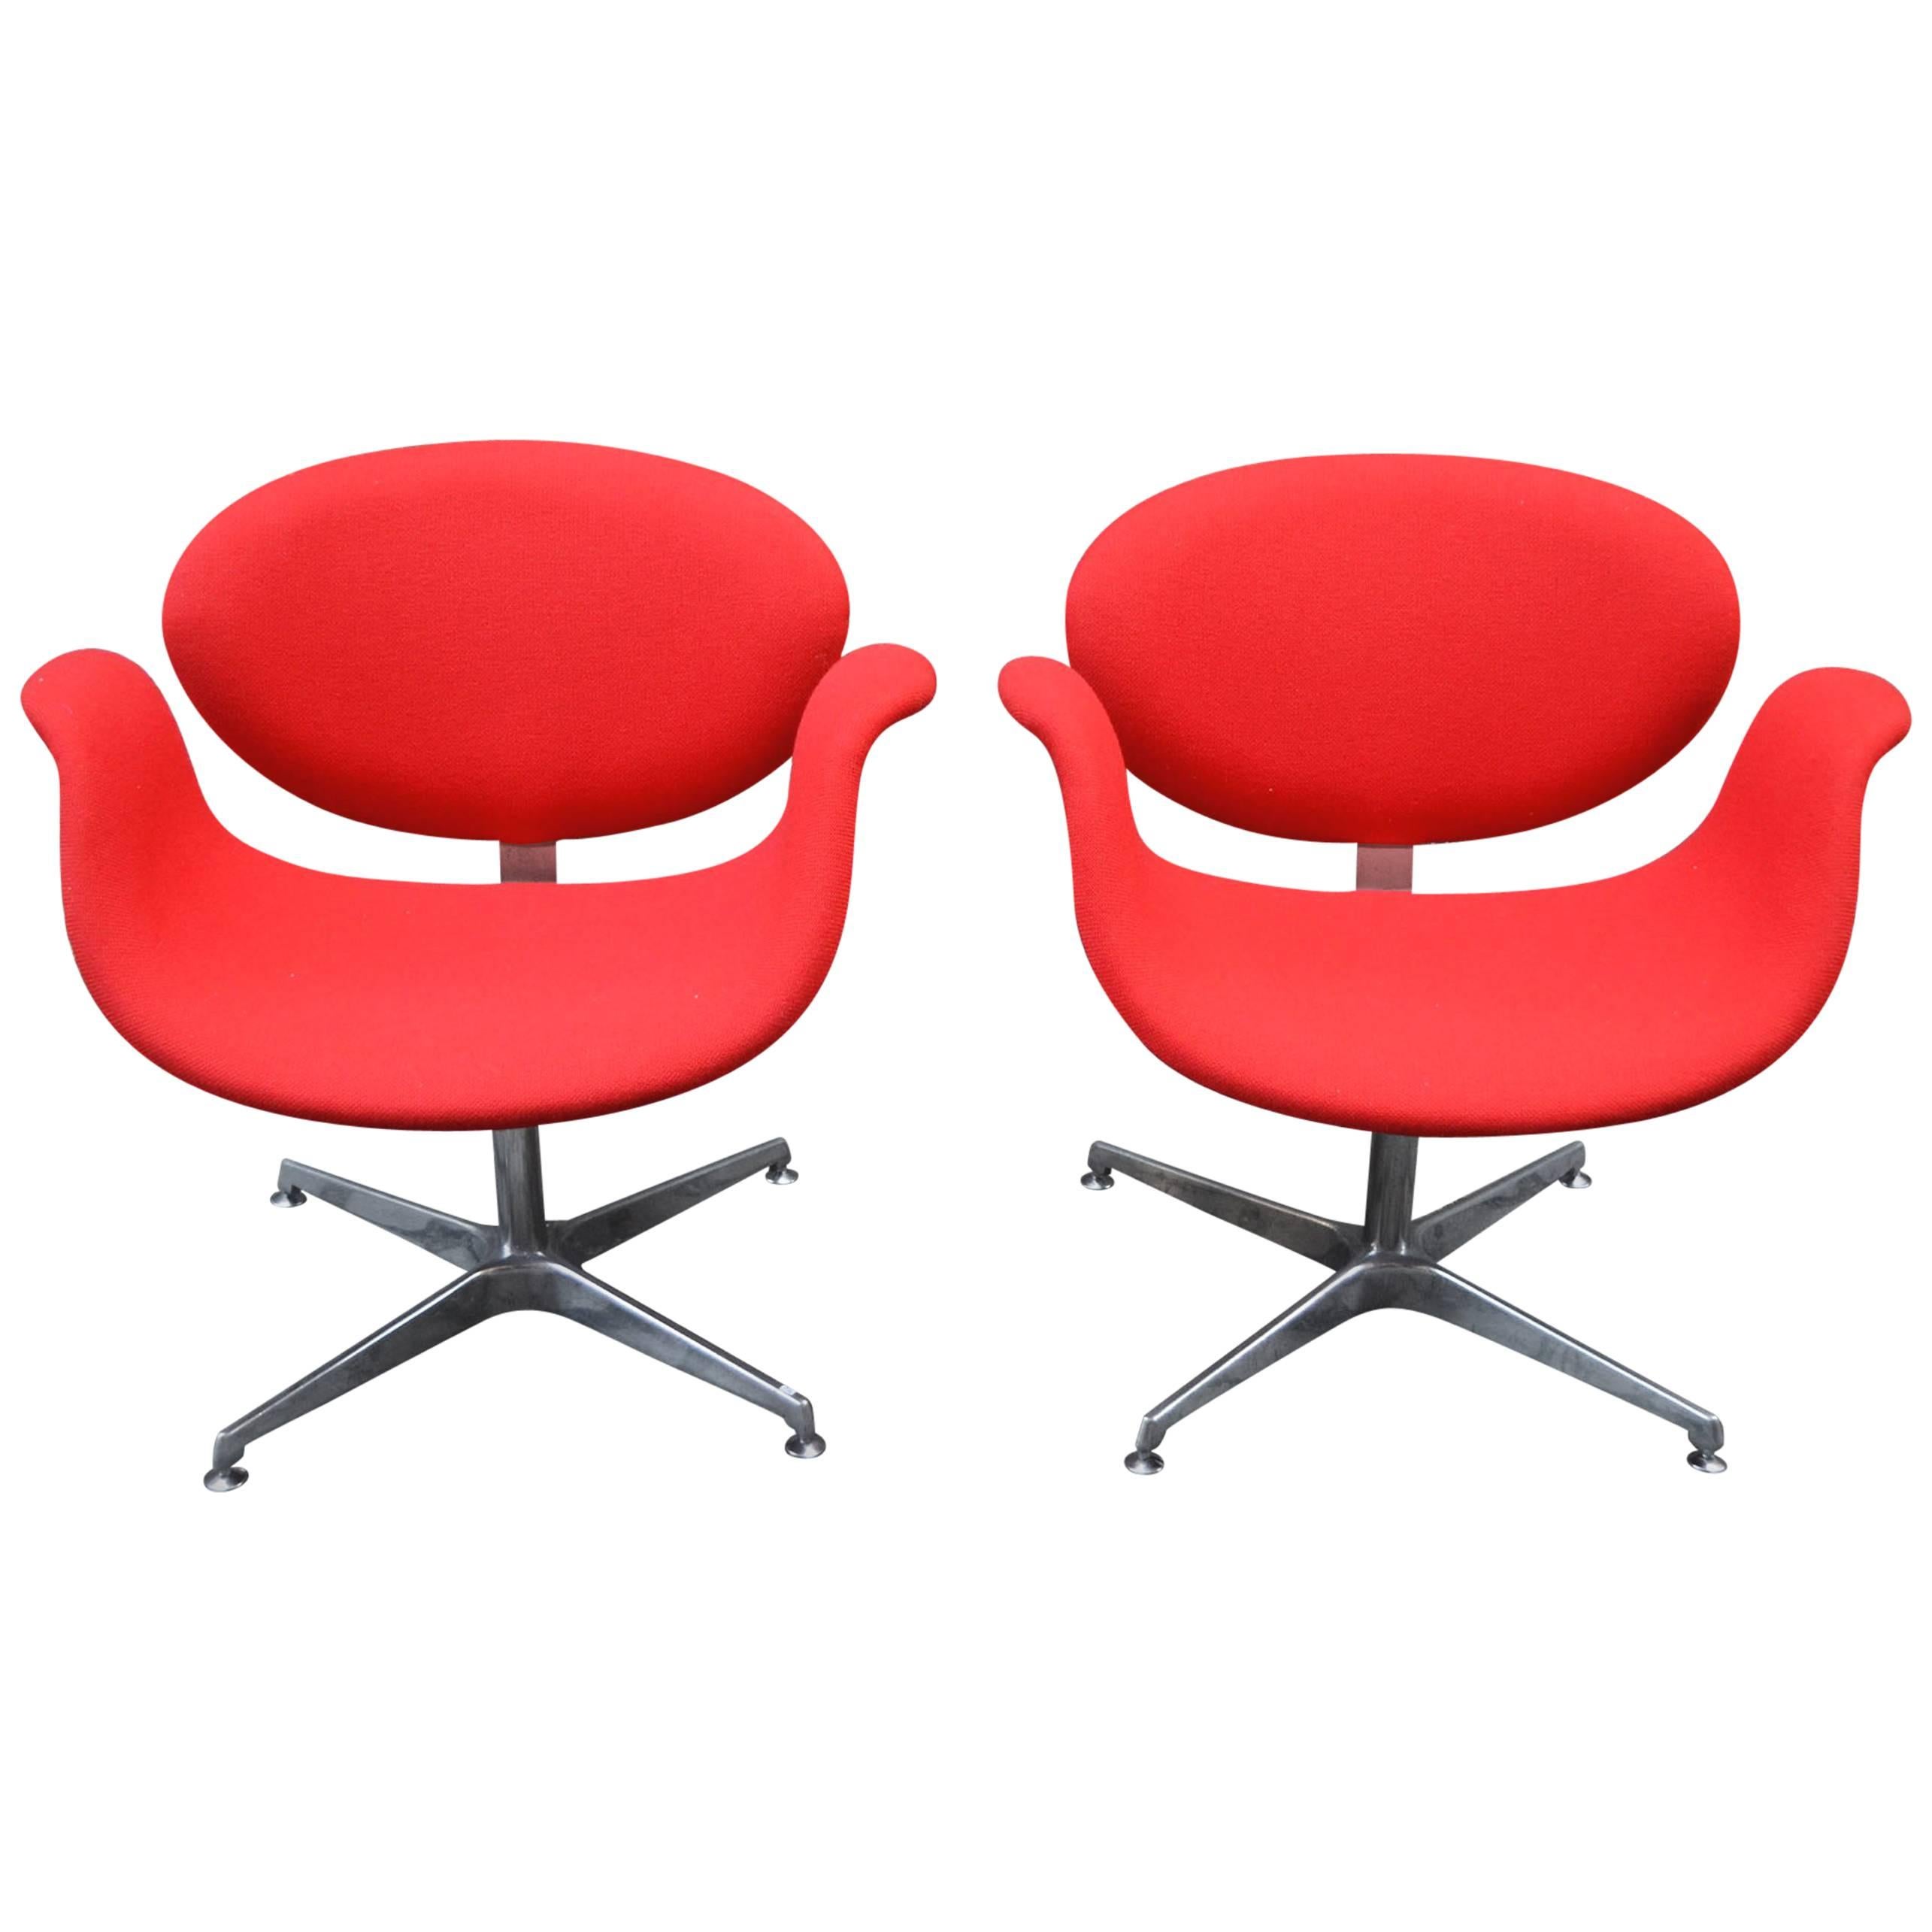 Pierre Paulin Little Tulip Chairs for Artifort 1960s First Series, Set of Two For Sale